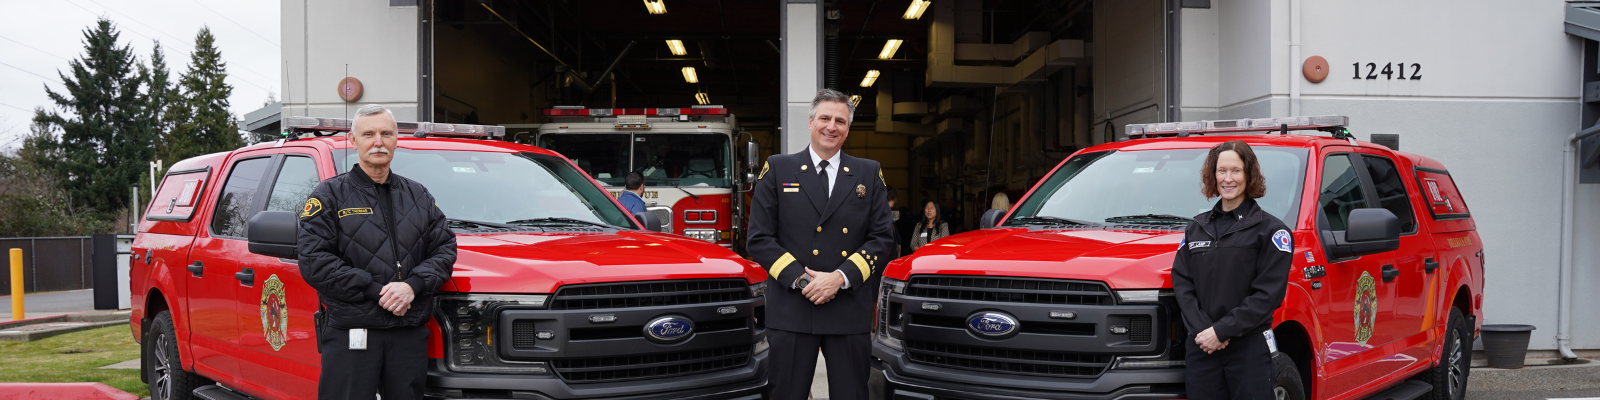 Image of Bellevue Fire Chief standing in between two fire department battalion chiefs and their red pickup trucks. 